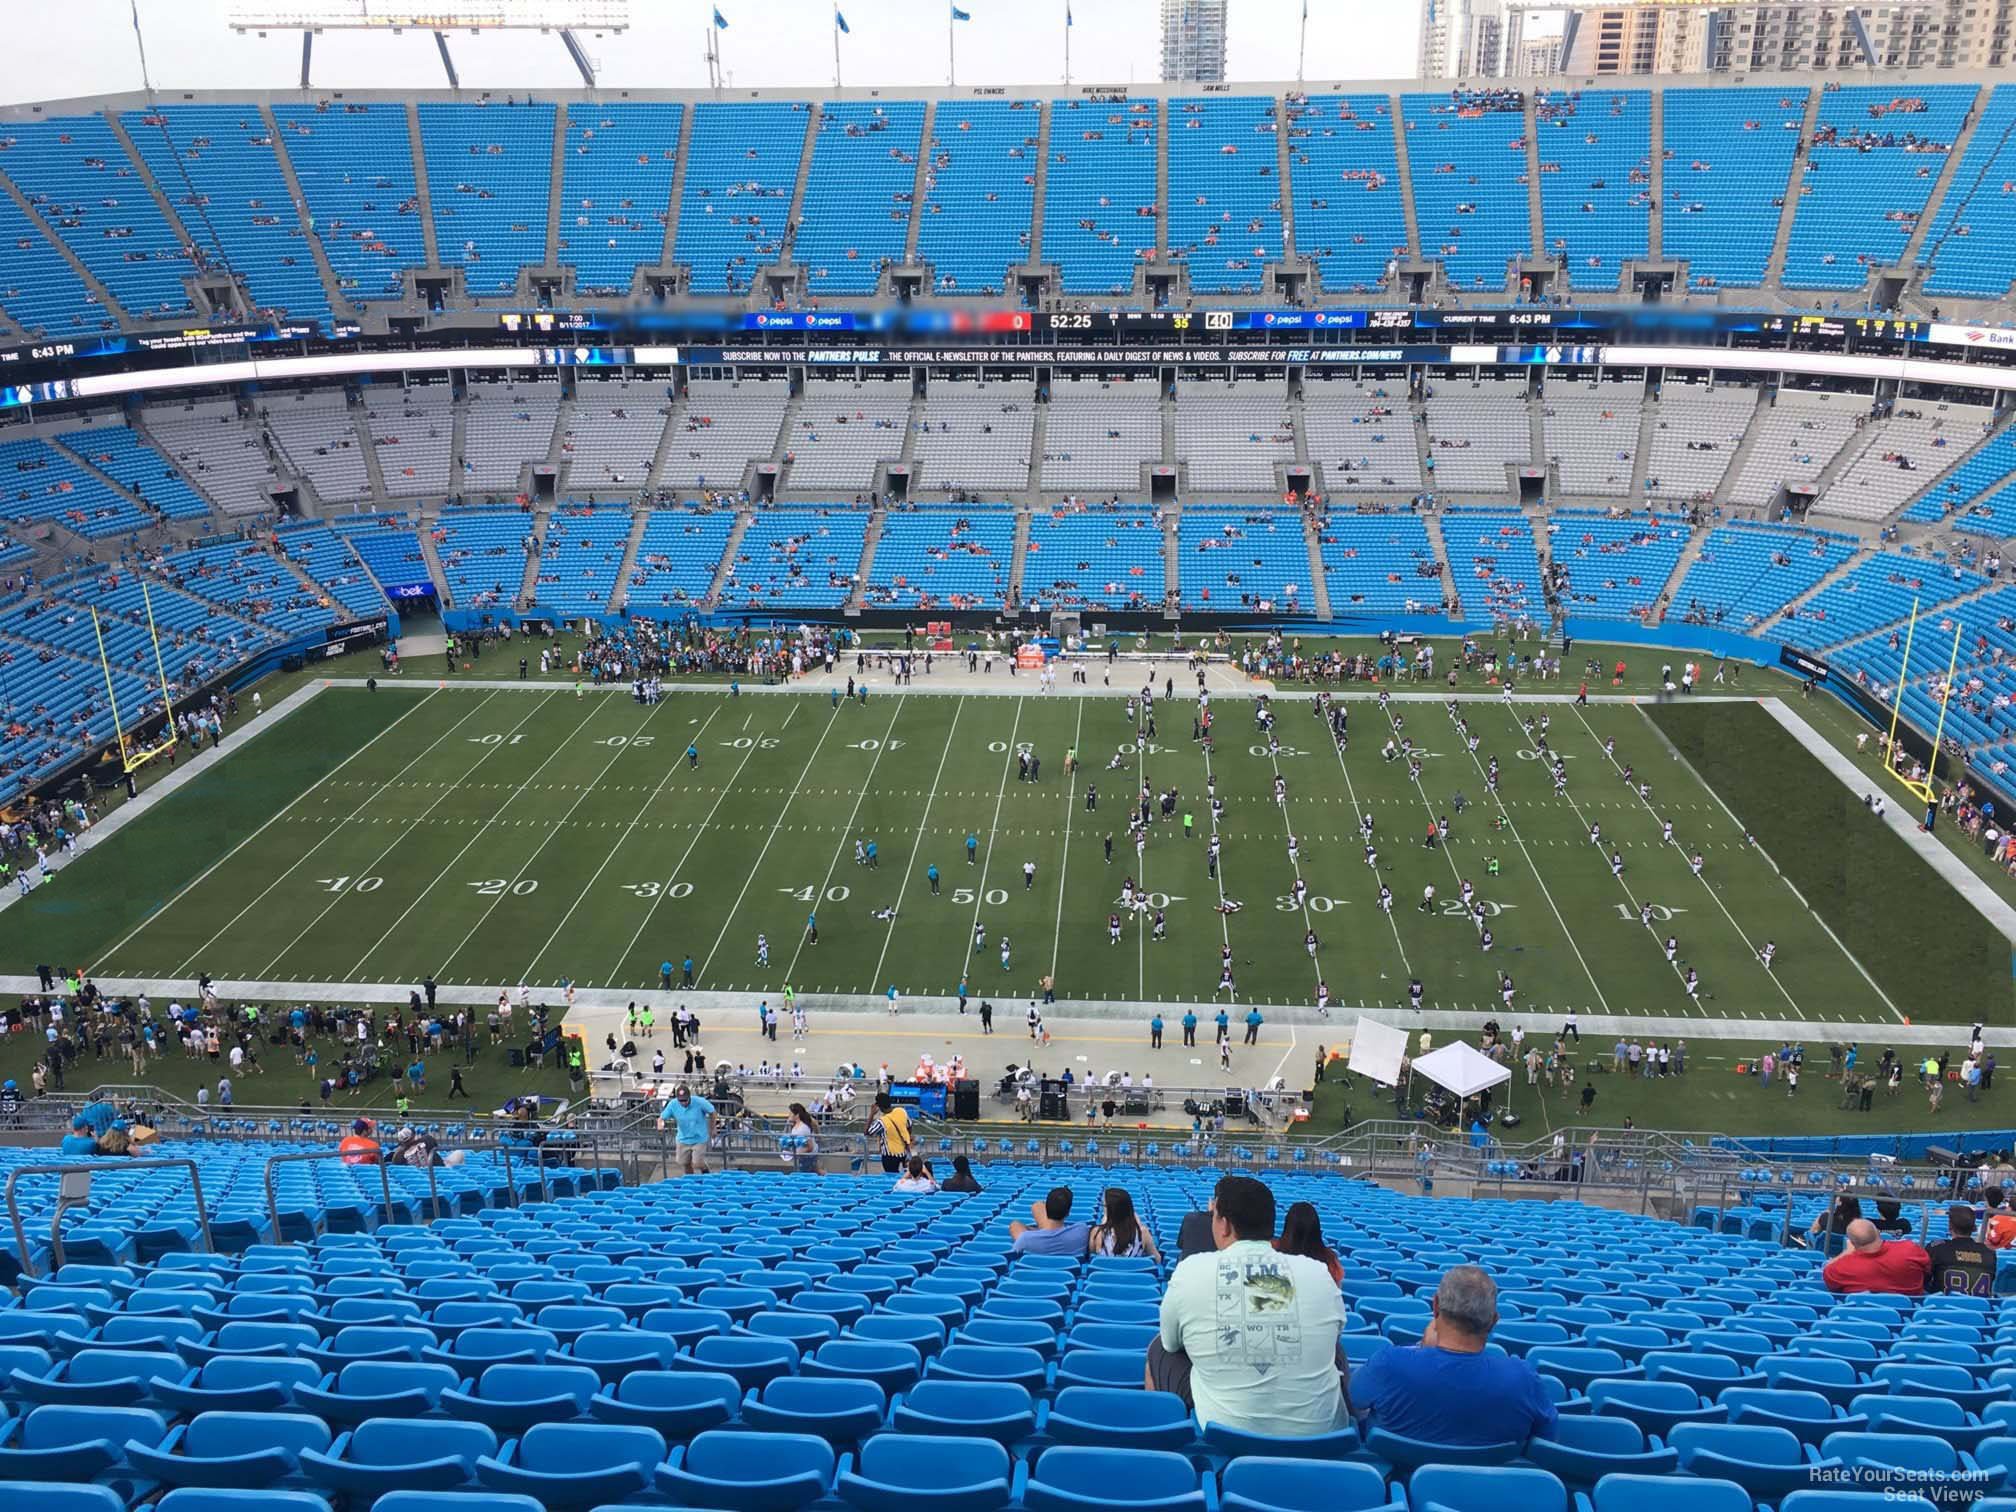 Section 541 at Bank of America Stadium 